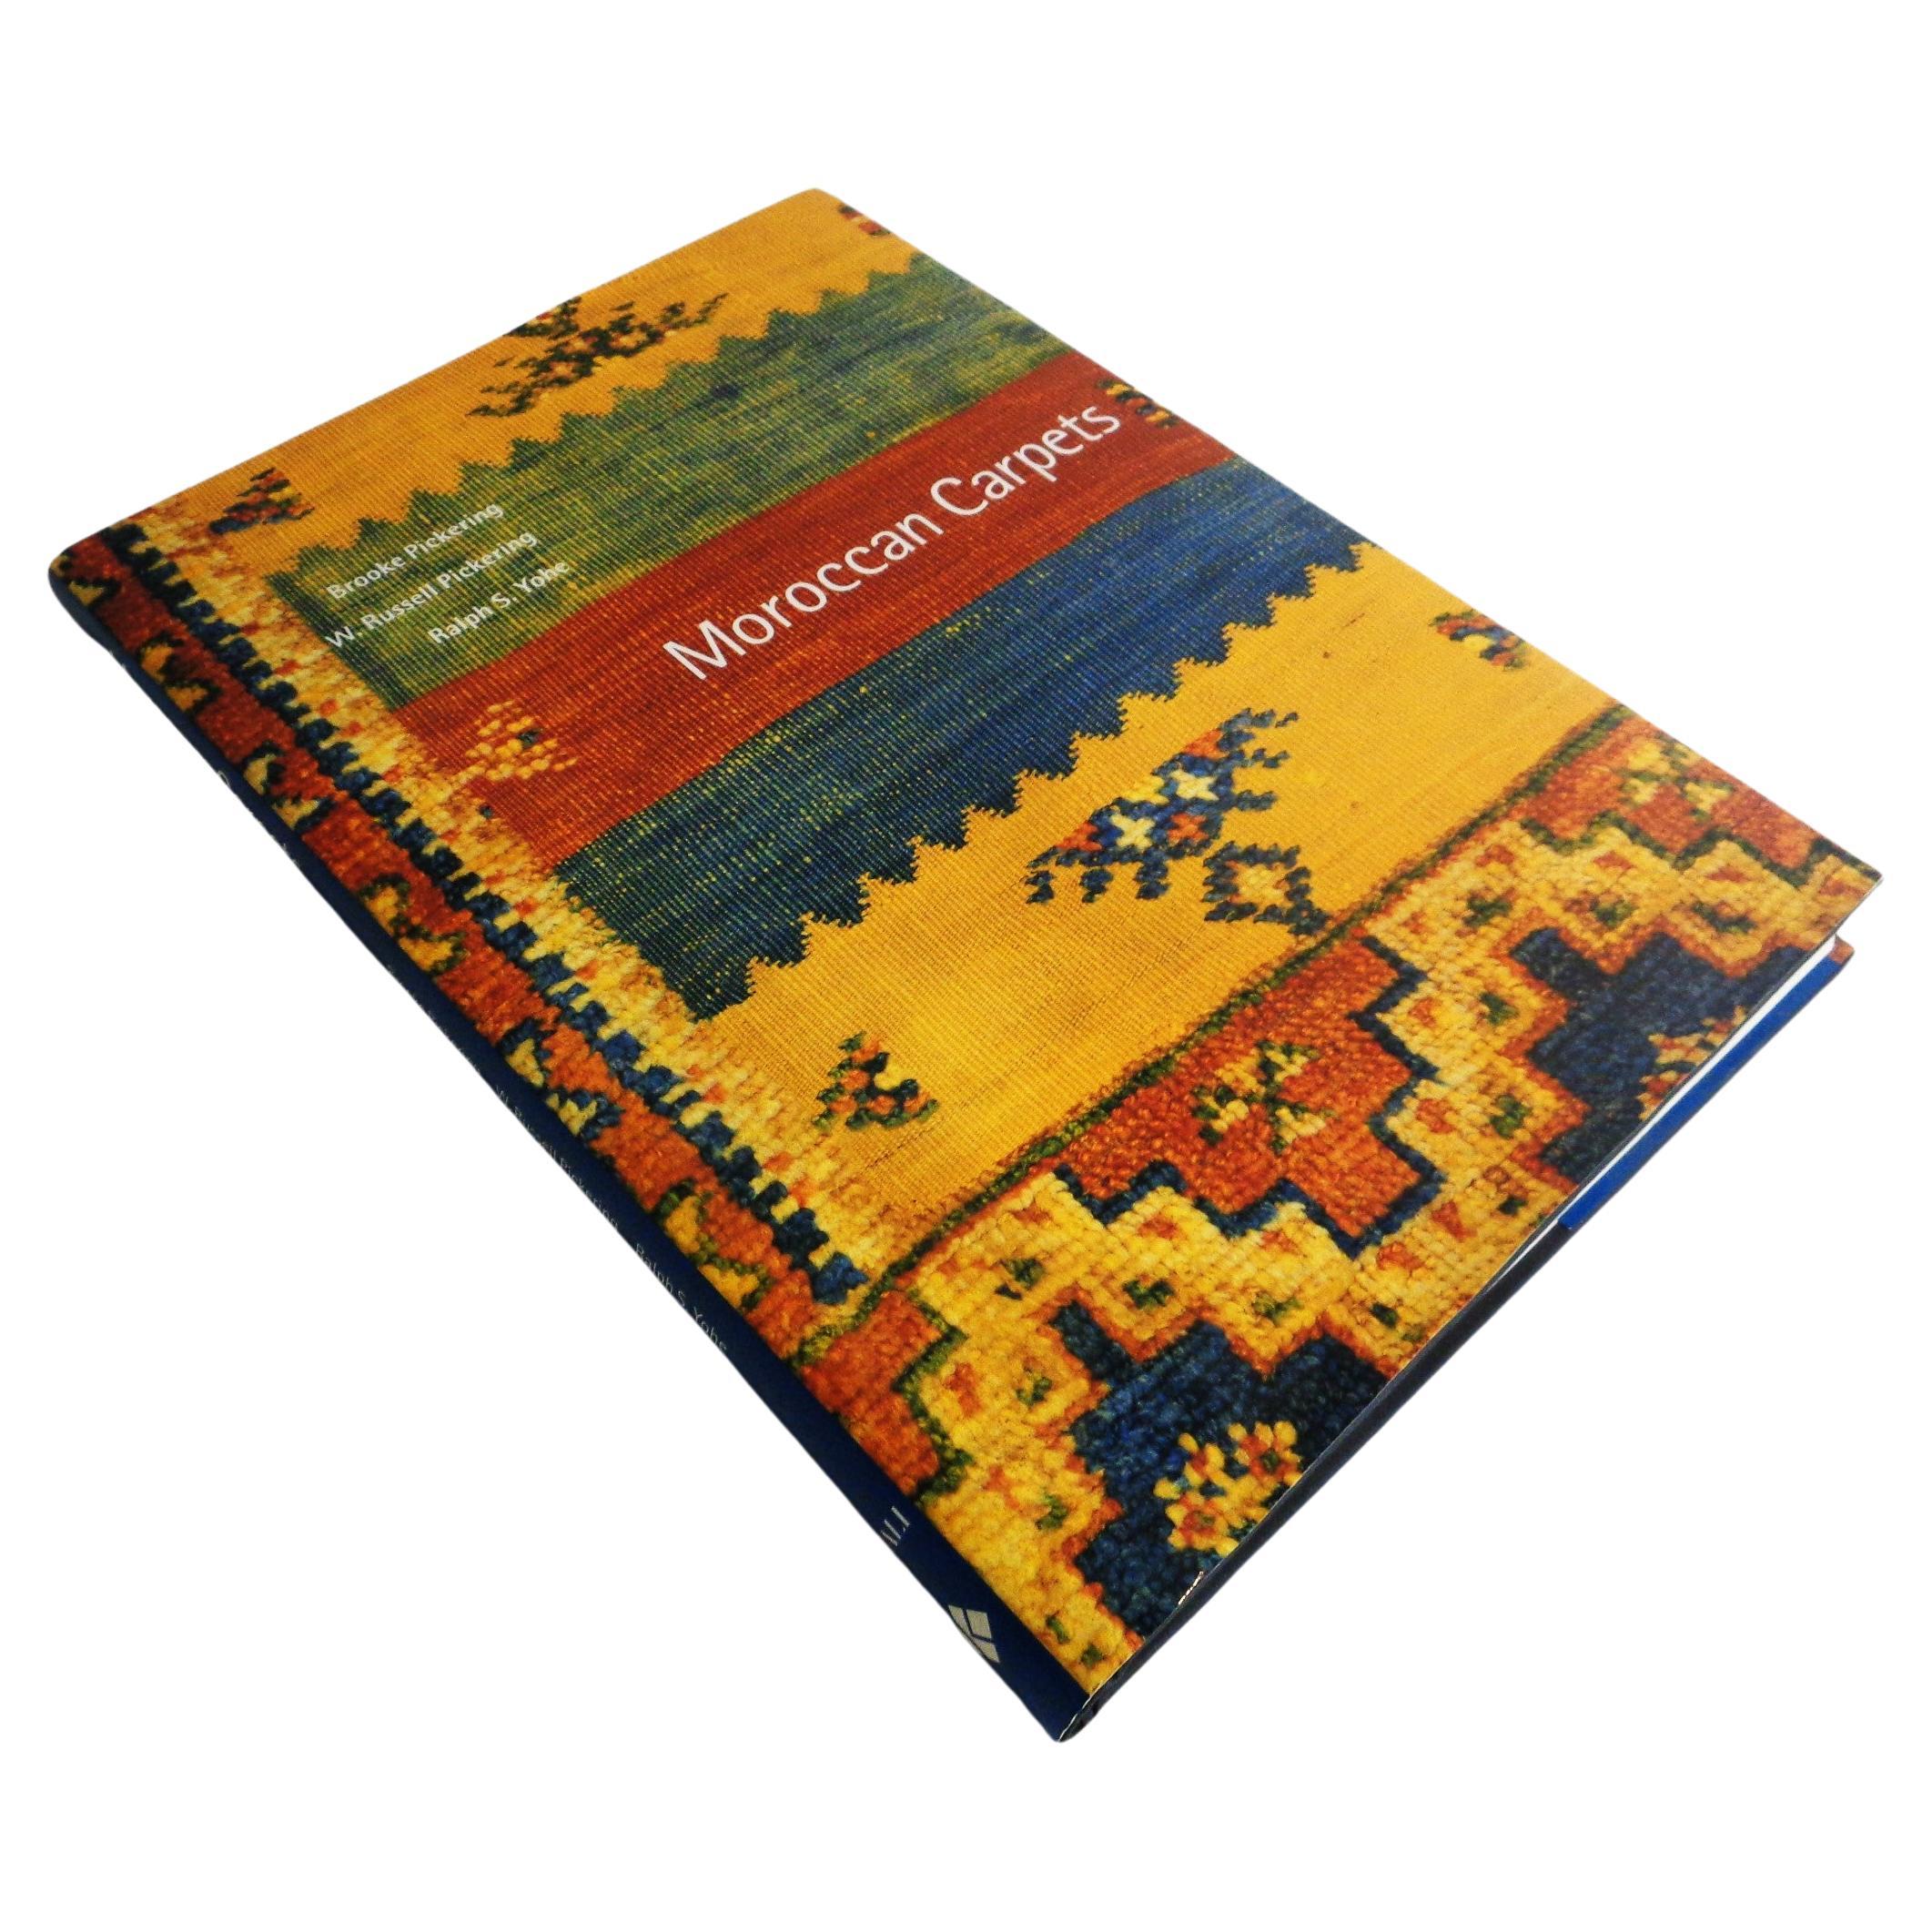  Moroccan Carpets: Pickering, Pickering, Yohe - Laurence King Hali Publications For Sale